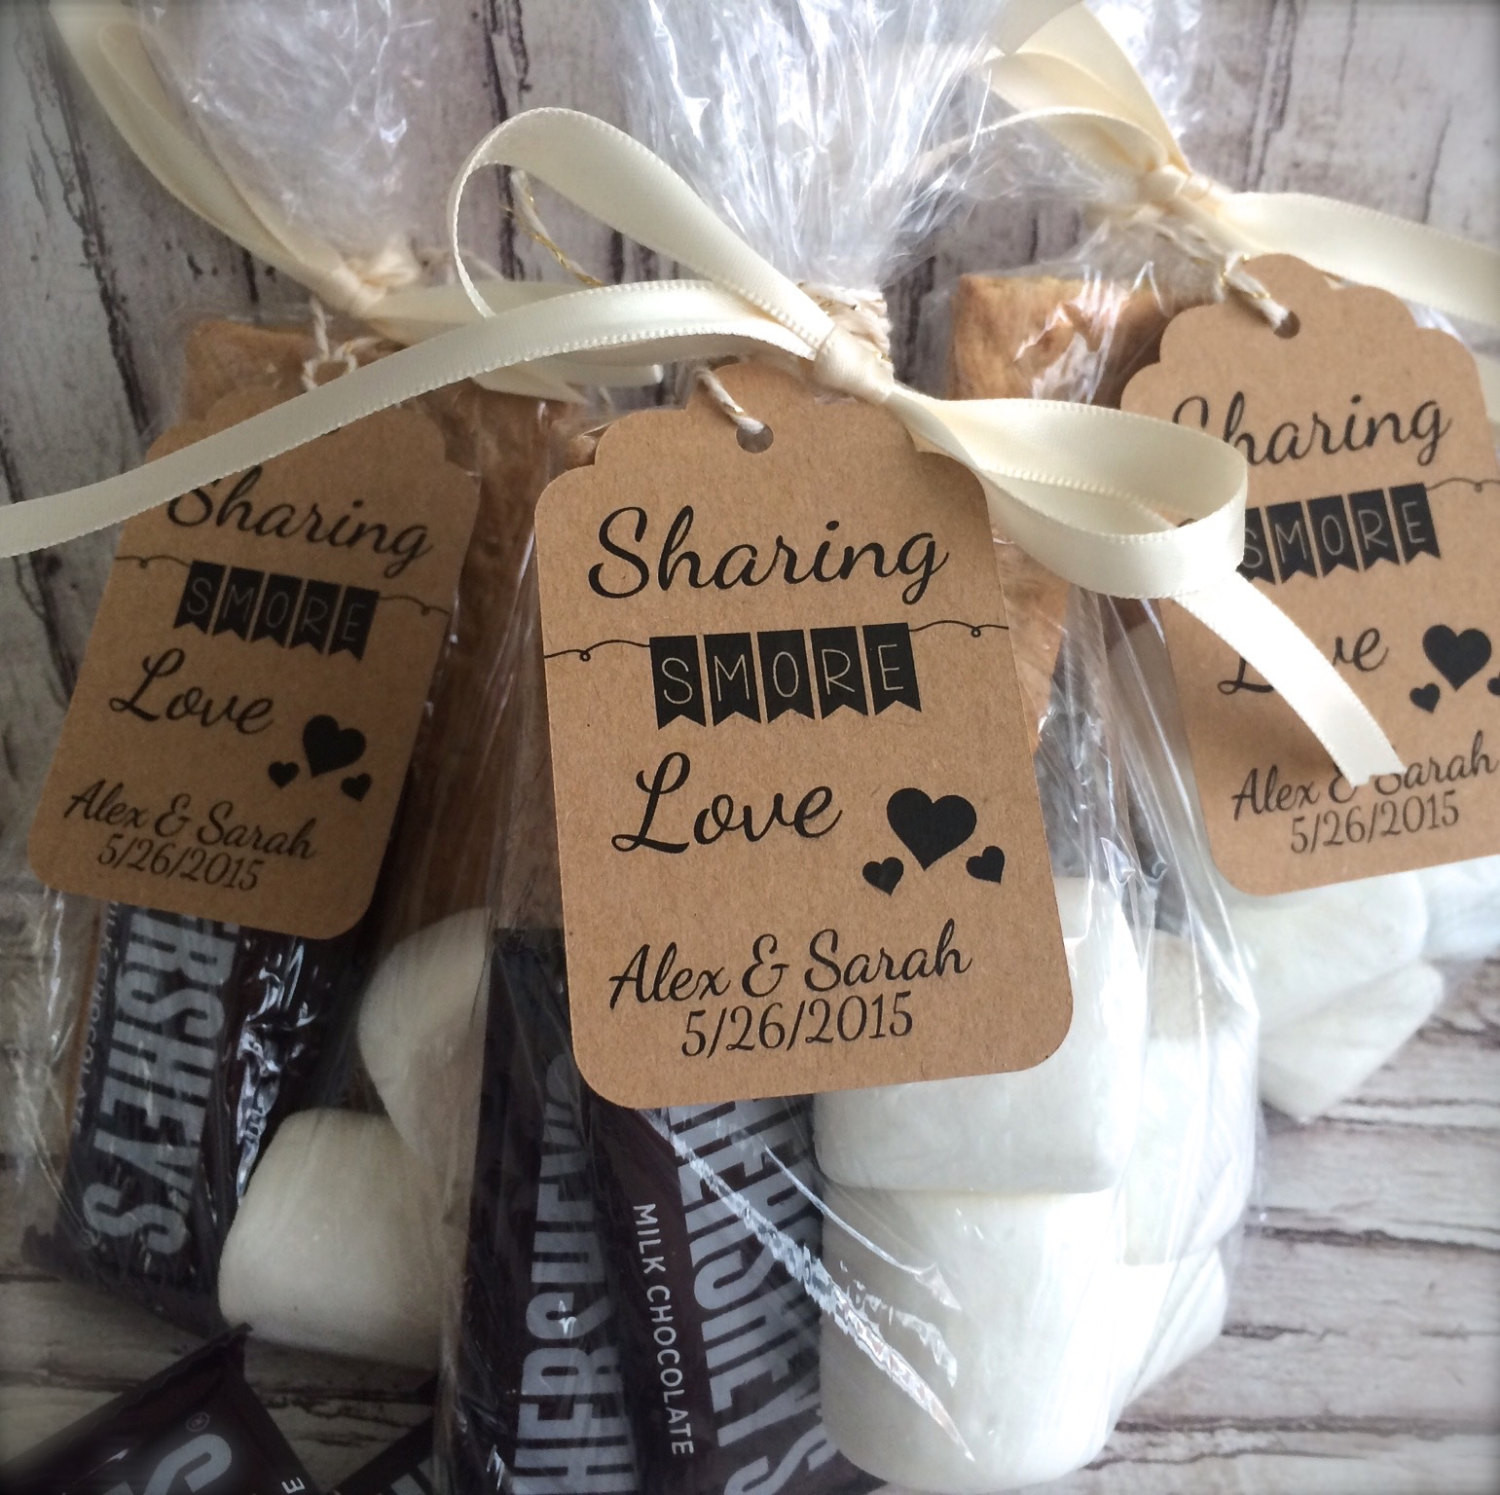 Smores Wedding Favors
 130 S mores Wedding Favor Tags Personalized by Marks MyHeart